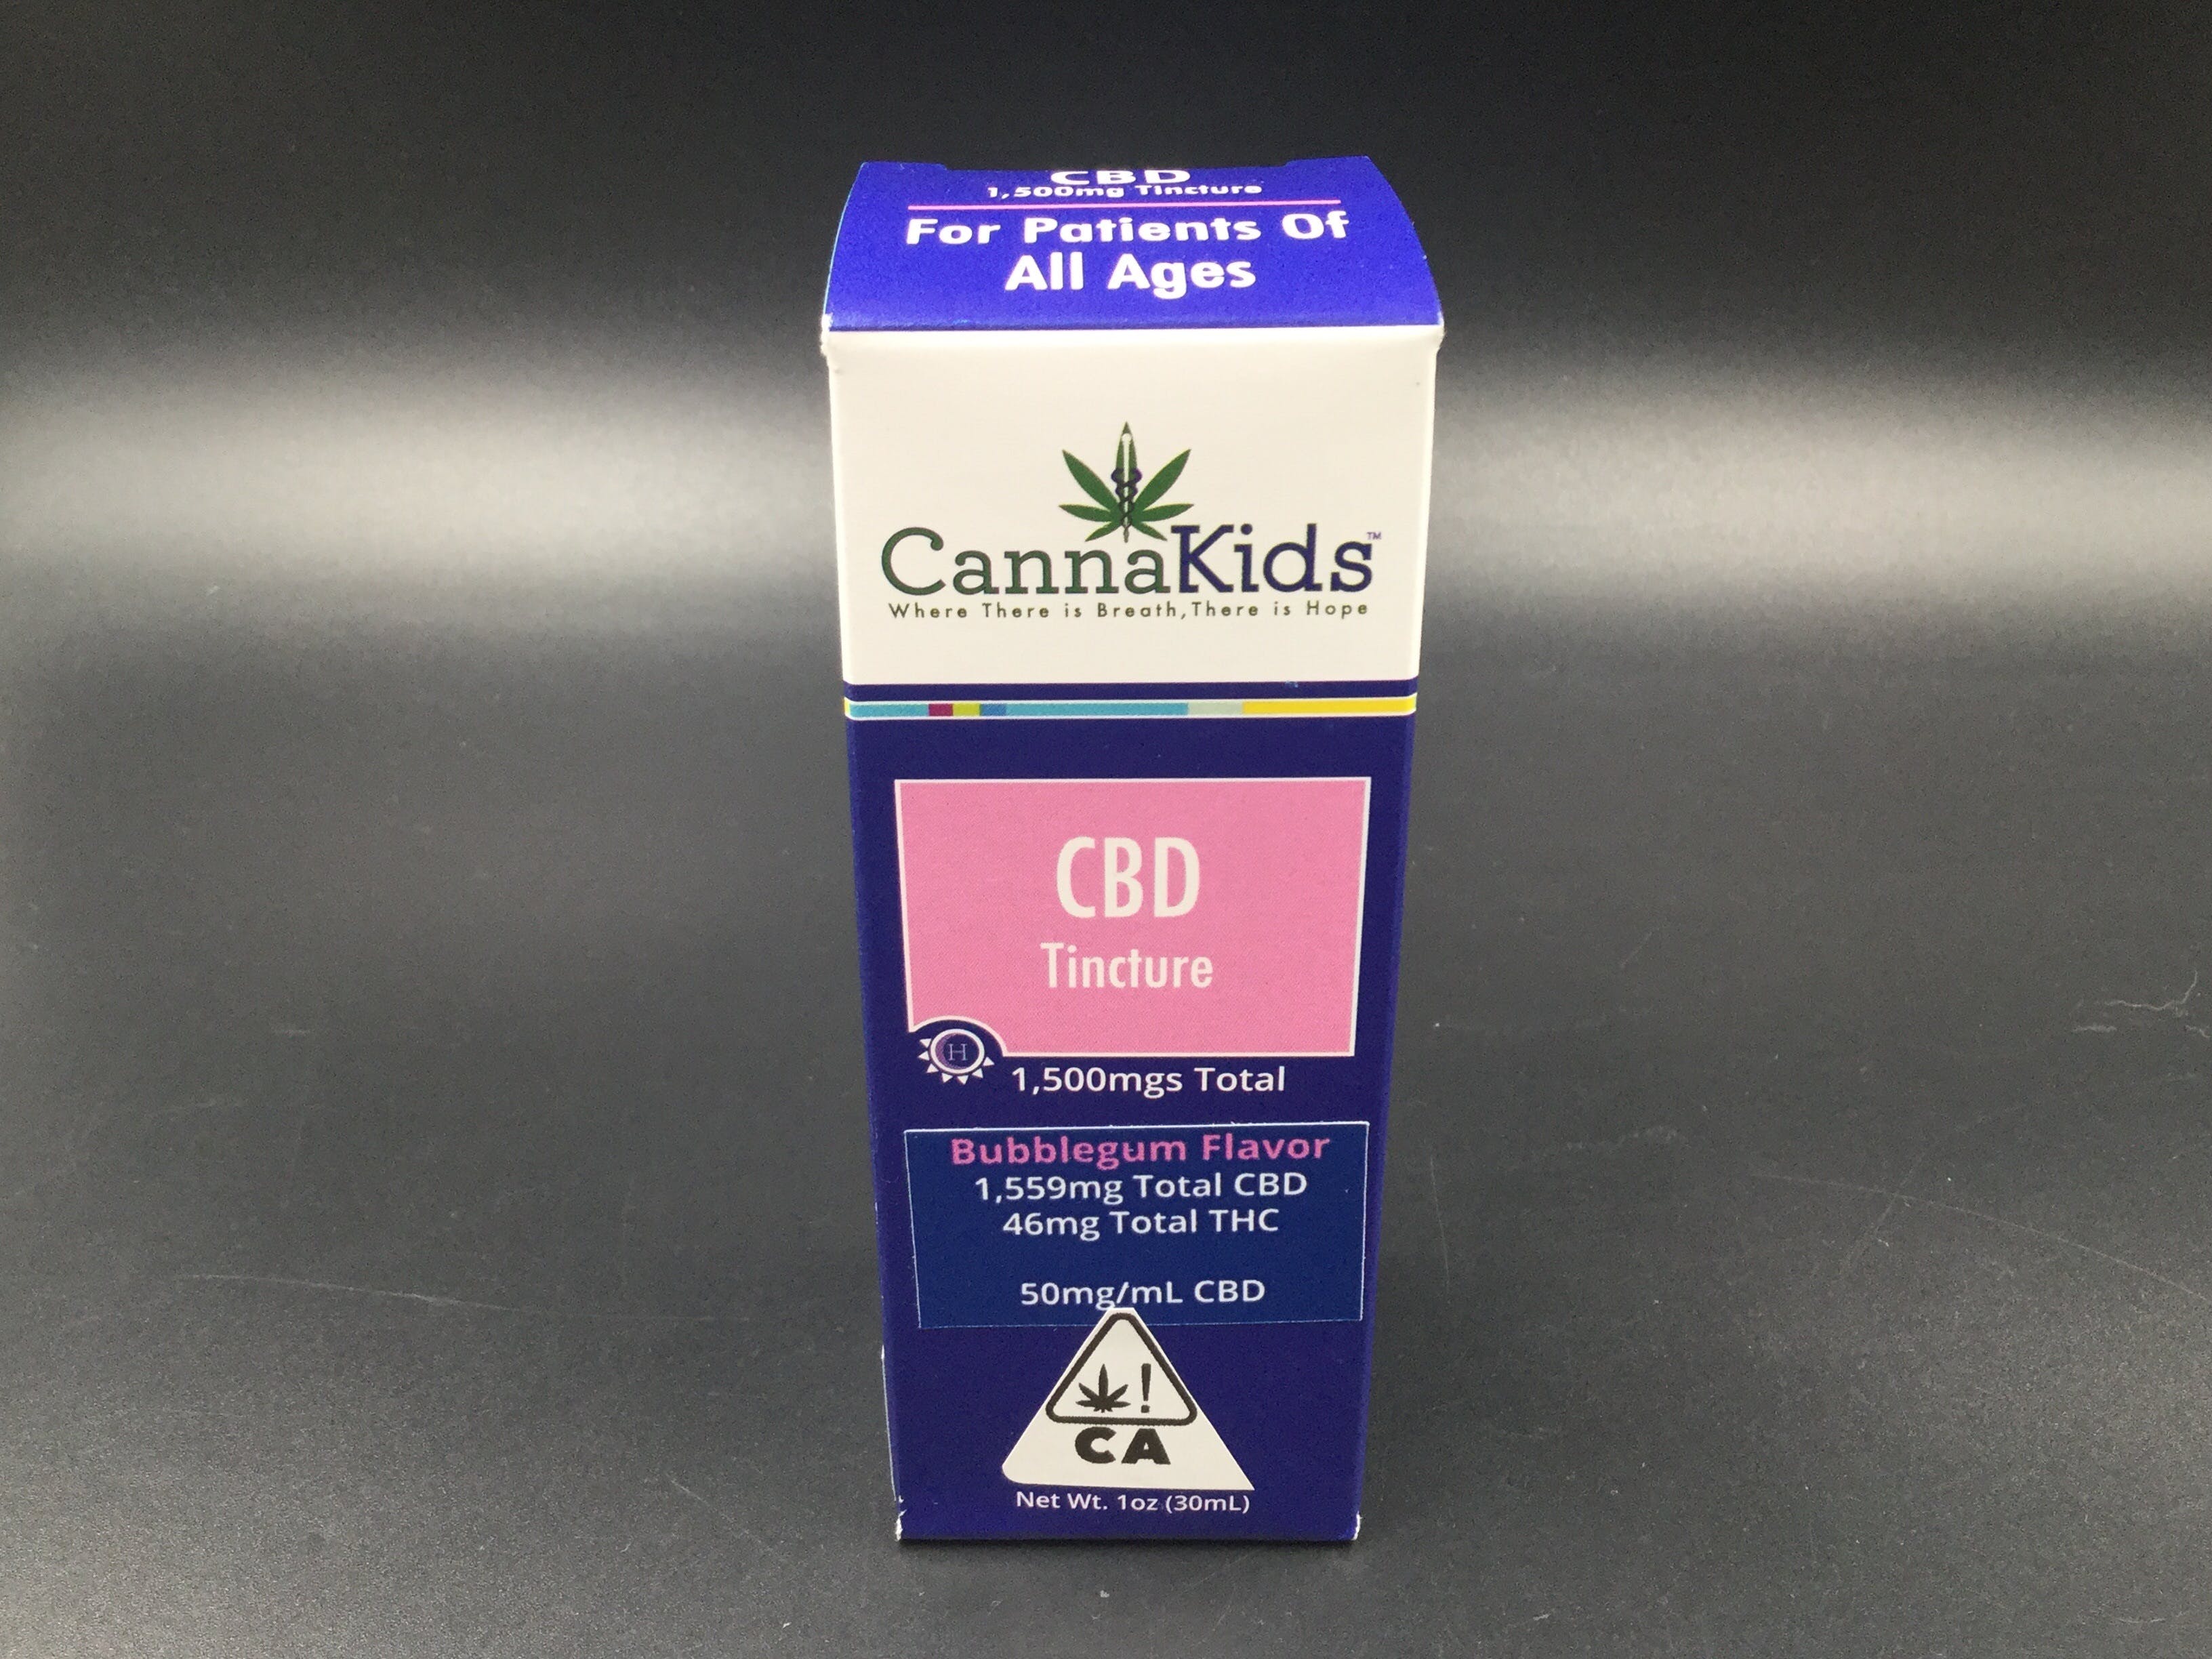 tincture-cannakids-bubble-gum-flavored-cbd-tincture-1500mg-50mgml